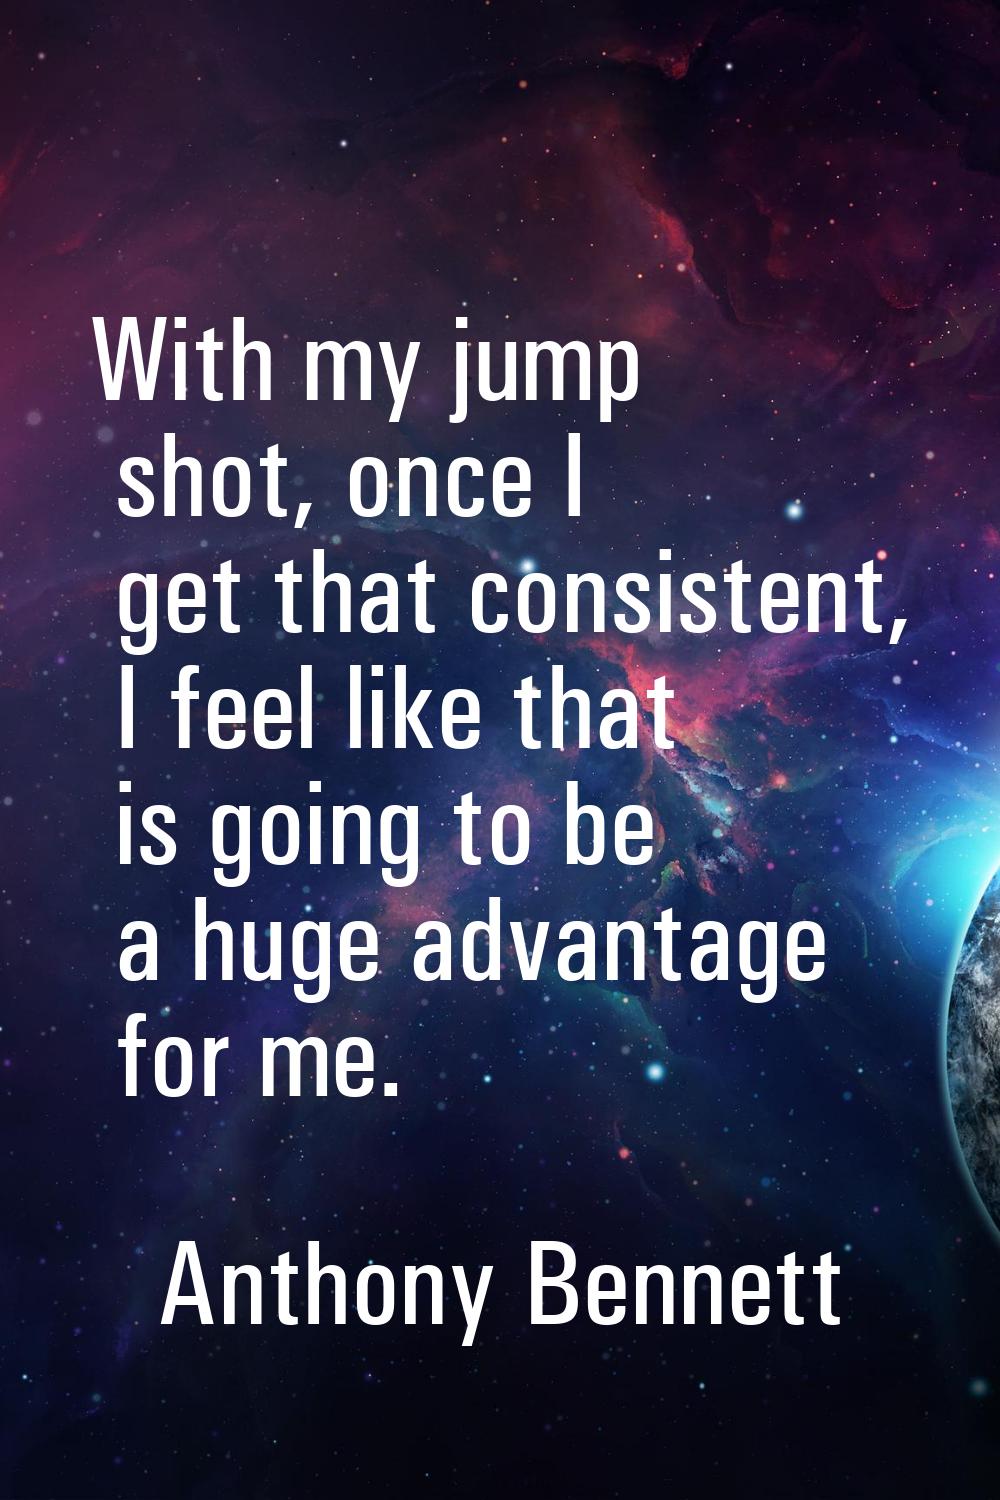 With my jump shot, once I get that consistent, I feel like that is going to be a huge advantage for